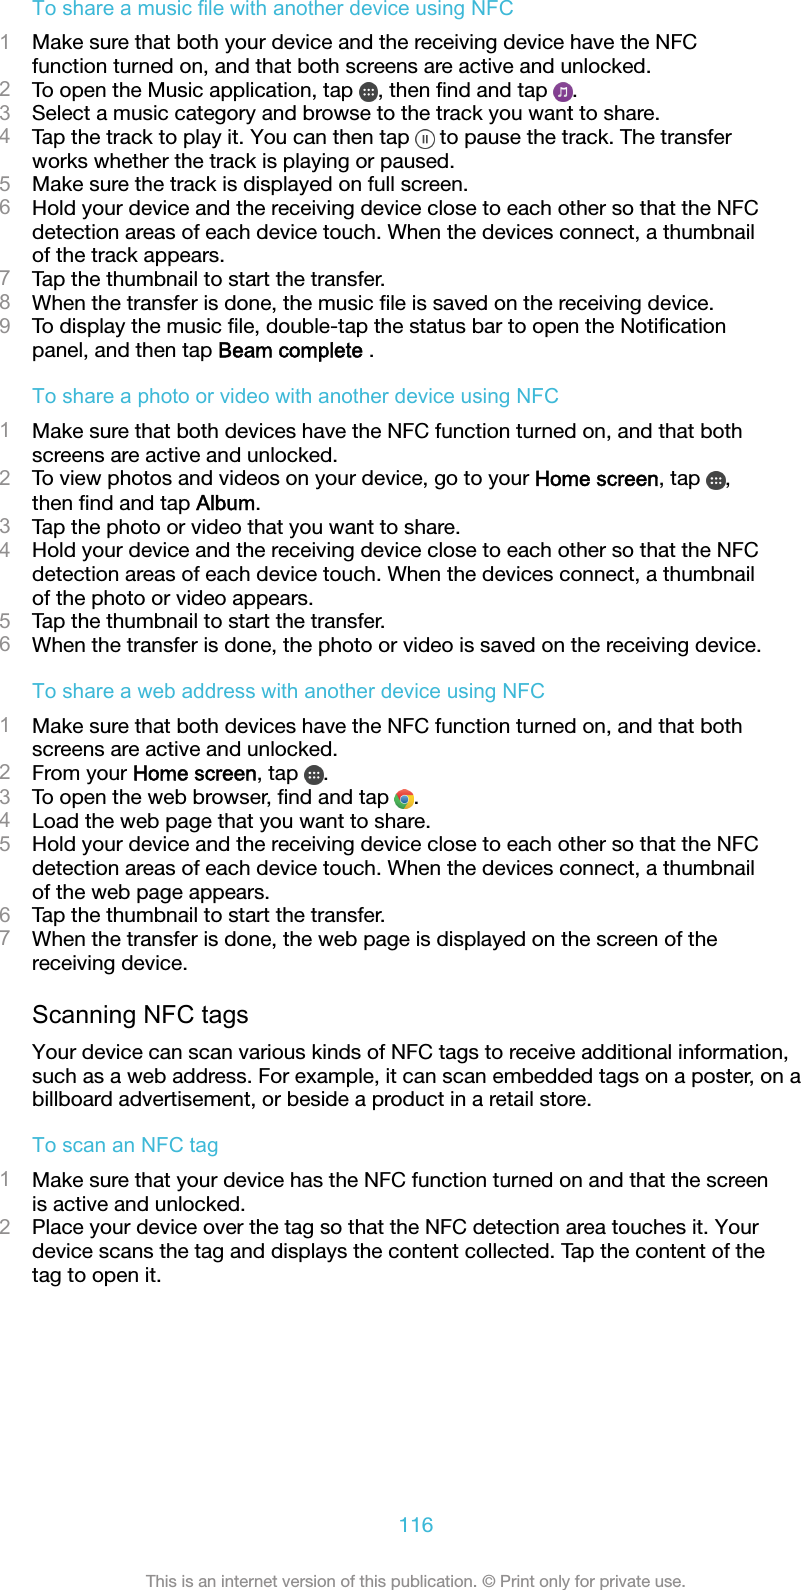 To share a music file with another device using NFC1Make sure that both your device and the receiving device have the NFCfunction turned on, and that both screens are active and unlocked.2To open the Music application, tap  , then ﬁnd and tap  .3Select a music category and browse to the track you want to share.4Tap the track to play it. You can then tap   to pause the track. The transferworks whether the track is playing or paused.5Make sure the track is displayed on full screen.6Hold your device and the receiving device close to each other so that the NFCdetection areas of each device touch. When the devices connect, a thumbnailof the track appears.7Tap the thumbnail to start the transfer.8When the transfer is done, the music ﬁle is saved on the receiving device.9To display the music ﬁle, double-tap the status bar to open the Notiﬁcationpanel, and then tap Beam complete .To share a photo or video with another device using NFC1Make sure that both devices have the NFC function turned on, and that bothscreens are active and unlocked.2To view photos and videos on your device, go to your Home screen, tap  ,then ﬁnd and tap Album.3Tap the photo or video that you want to share.4Hold your device and the receiving device close to each other so that the NFCdetection areas of each device touch. When the devices connect, a thumbnailof the photo or video appears.5Tap the thumbnail to start the transfer.6When the transfer is done, the photo or video is saved on the receiving device.To share a web address with another device using NFC1Make sure that both devices have the NFC function turned on, and that bothscreens are active and unlocked.2From your Home screen, tap  .3To open the web browser, ﬁnd and tap  .4Load the web page that you want to share.5Hold your device and the receiving device close to each other so that the NFCdetection areas of each device touch. When the devices connect, a thumbnailof the web page appears.6Tap the thumbnail to start the transfer.7When the transfer is done, the web page is displayed on the screen of thereceiving device.Scanning NFC tagsYour device can scan various kinds of NFC tags to receive additional information,such as a web address. For example, it can scan embedded tags on a poster, on abillboard advertisement, or beside a product in a retail store.To scan an NFC tag1Make sure that your device has the NFC function turned on and that the screenis active and unlocked.2Place your device over the tag so that the NFC detection area touches it. Yourdevice scans the tag and displays the content collected. Tap the content of thetag to open it.116This is an internet version of this publication. © Print only for private use.